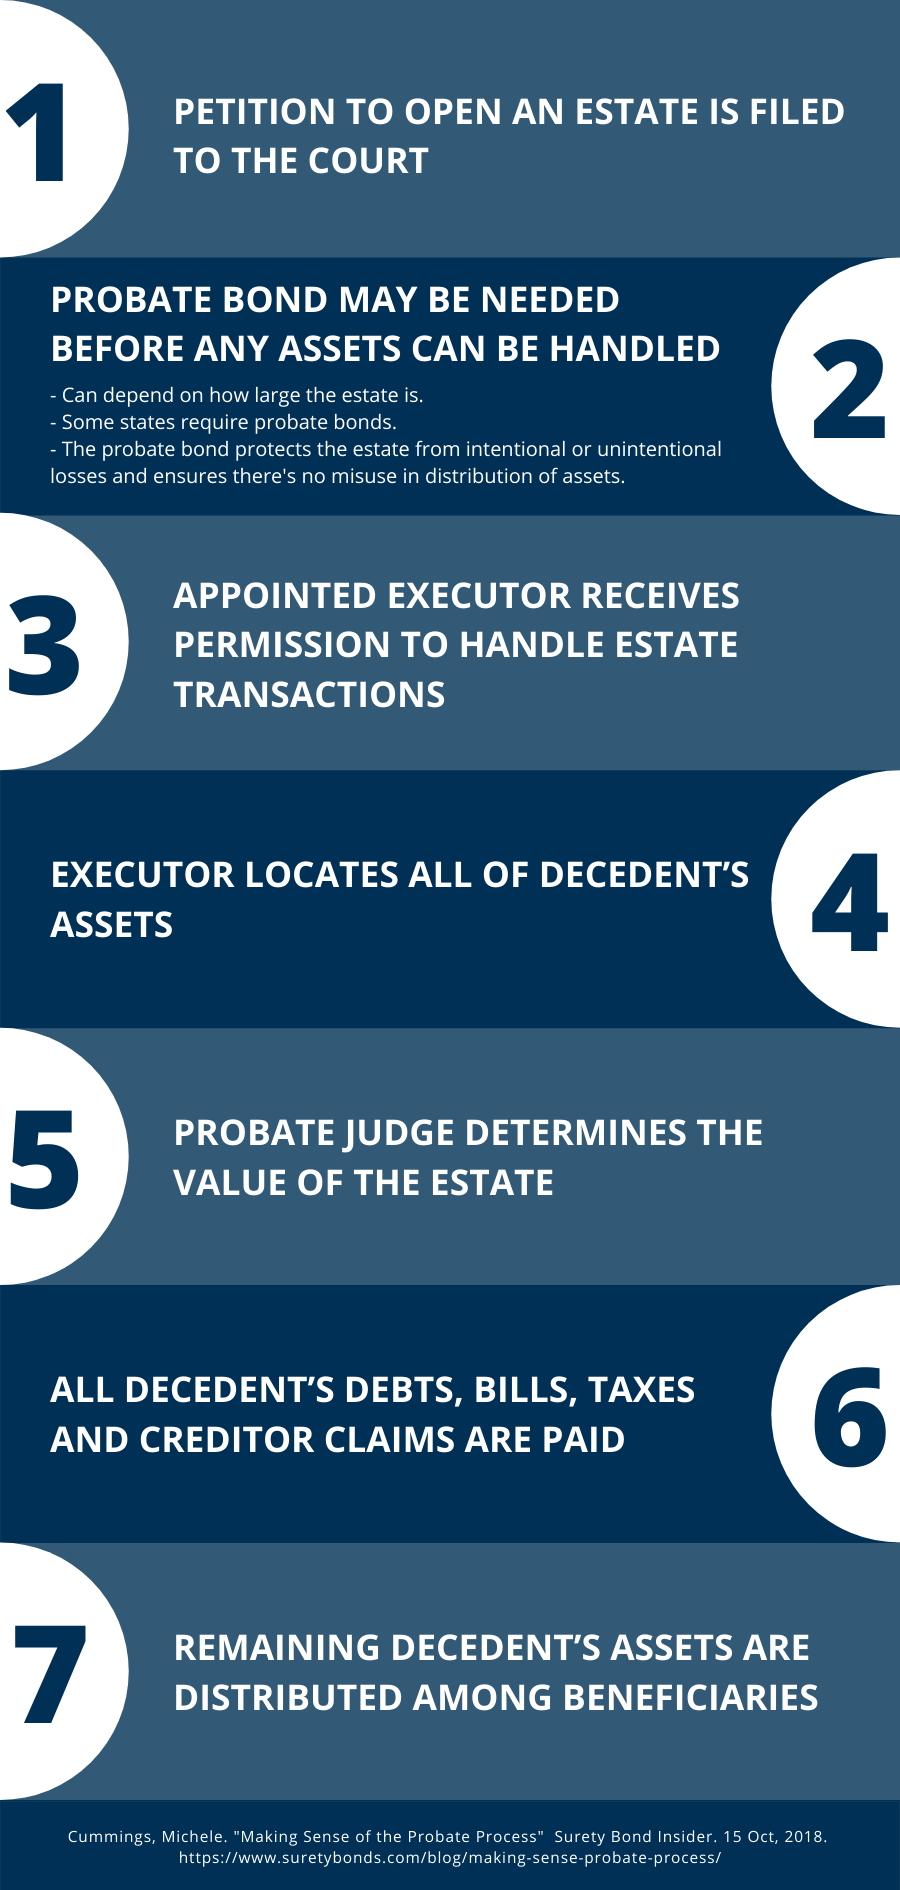 1. Petition to open an estate is filed to the court. 2. Probate bond may be needed before any assets can be handled. Can depend on how large the estate is. Some states require probate bonds. The probate bond protects the estate from intentional or unintentional losses and ensures there's no misuse in distribution of assets. 3. Appointed executor receives permission to handle estate transactions. 4. Executor locates all of decendent's assets. 5. Probate judge determines the value of the estate. 6. All decendent's debts, bills, taxes, and creditor claims are paid. 7. Remaining decendent's assets are distributed amoung beneficiaries. 